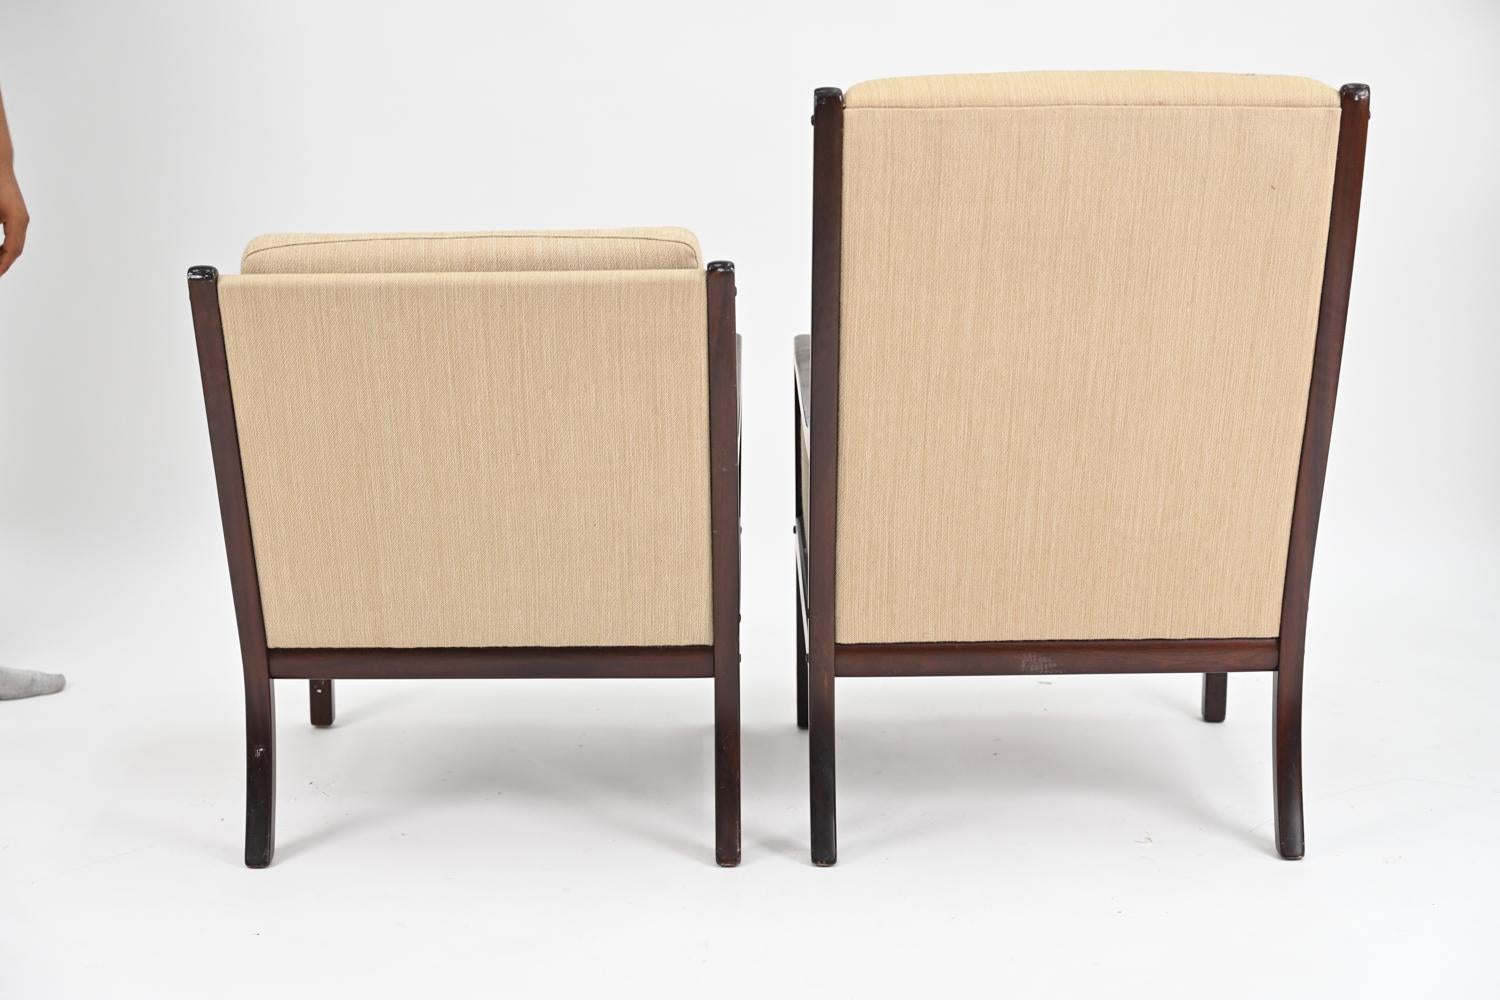 Mahogany Pair of Ole Wanscher for Poul Jeppesens Møbelfabrik Lounge Chairs